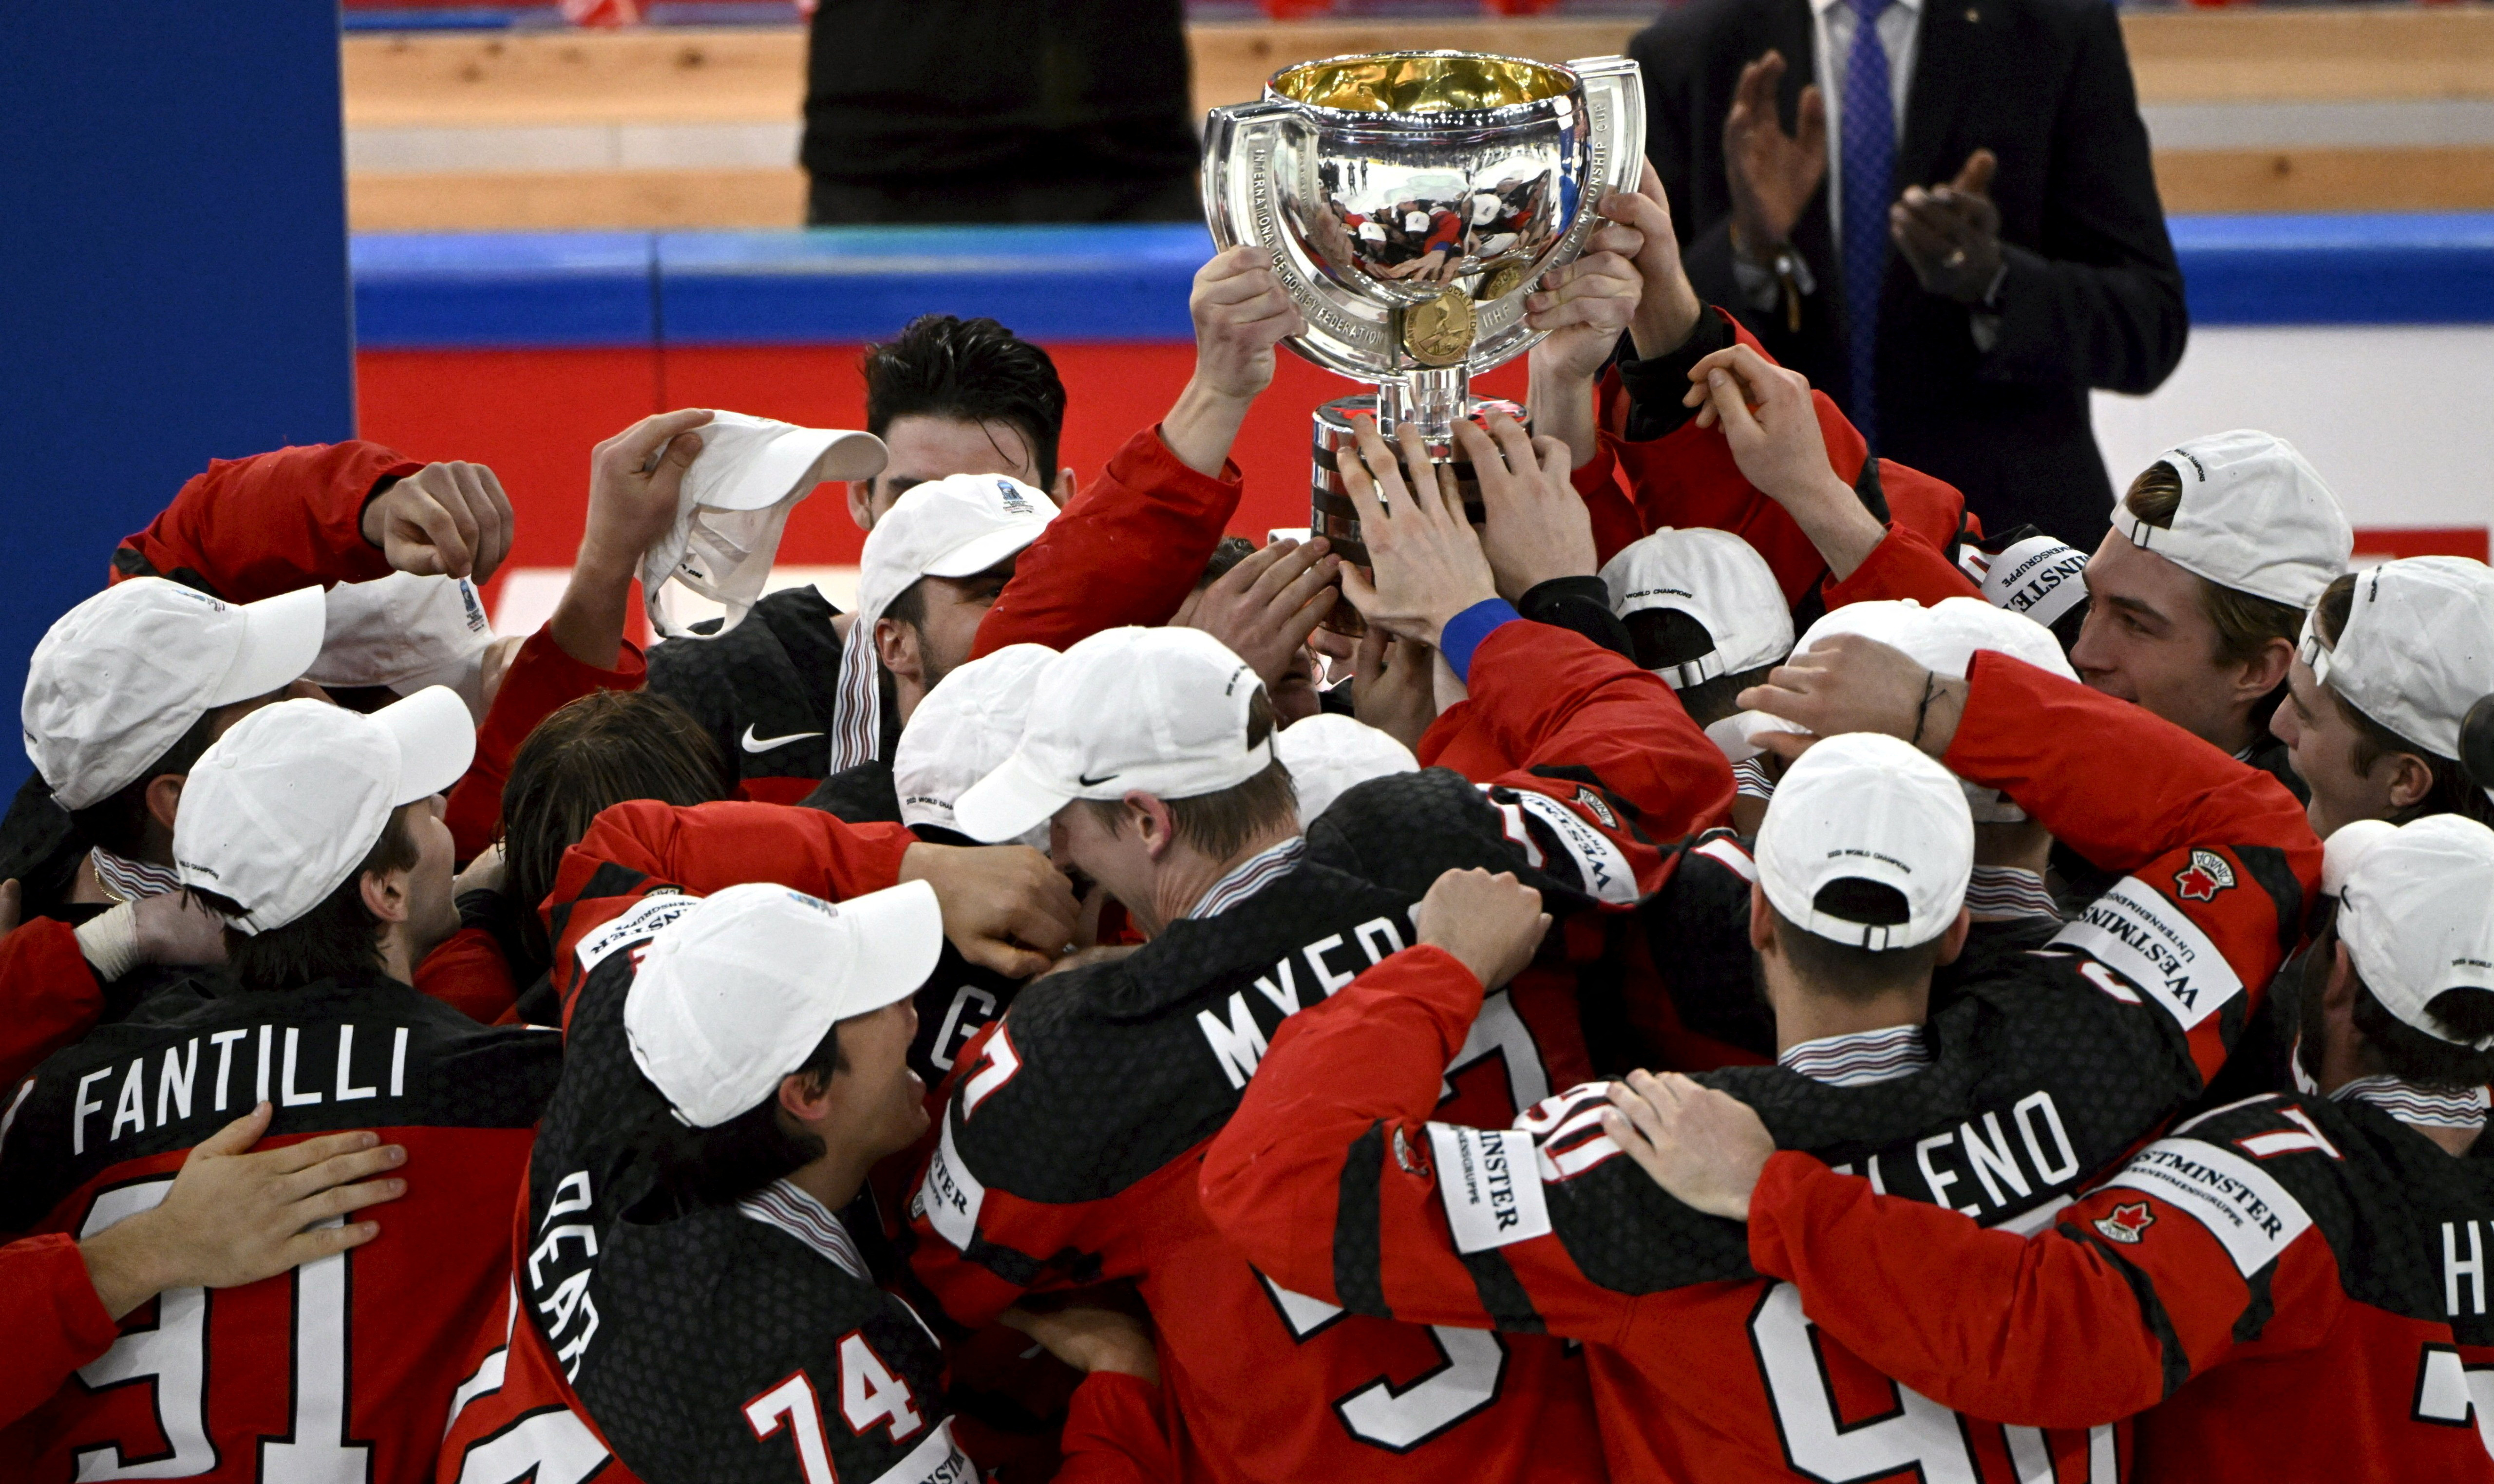 Ice Hockey-Canada defeat Germany to win World Championship gold Reuters